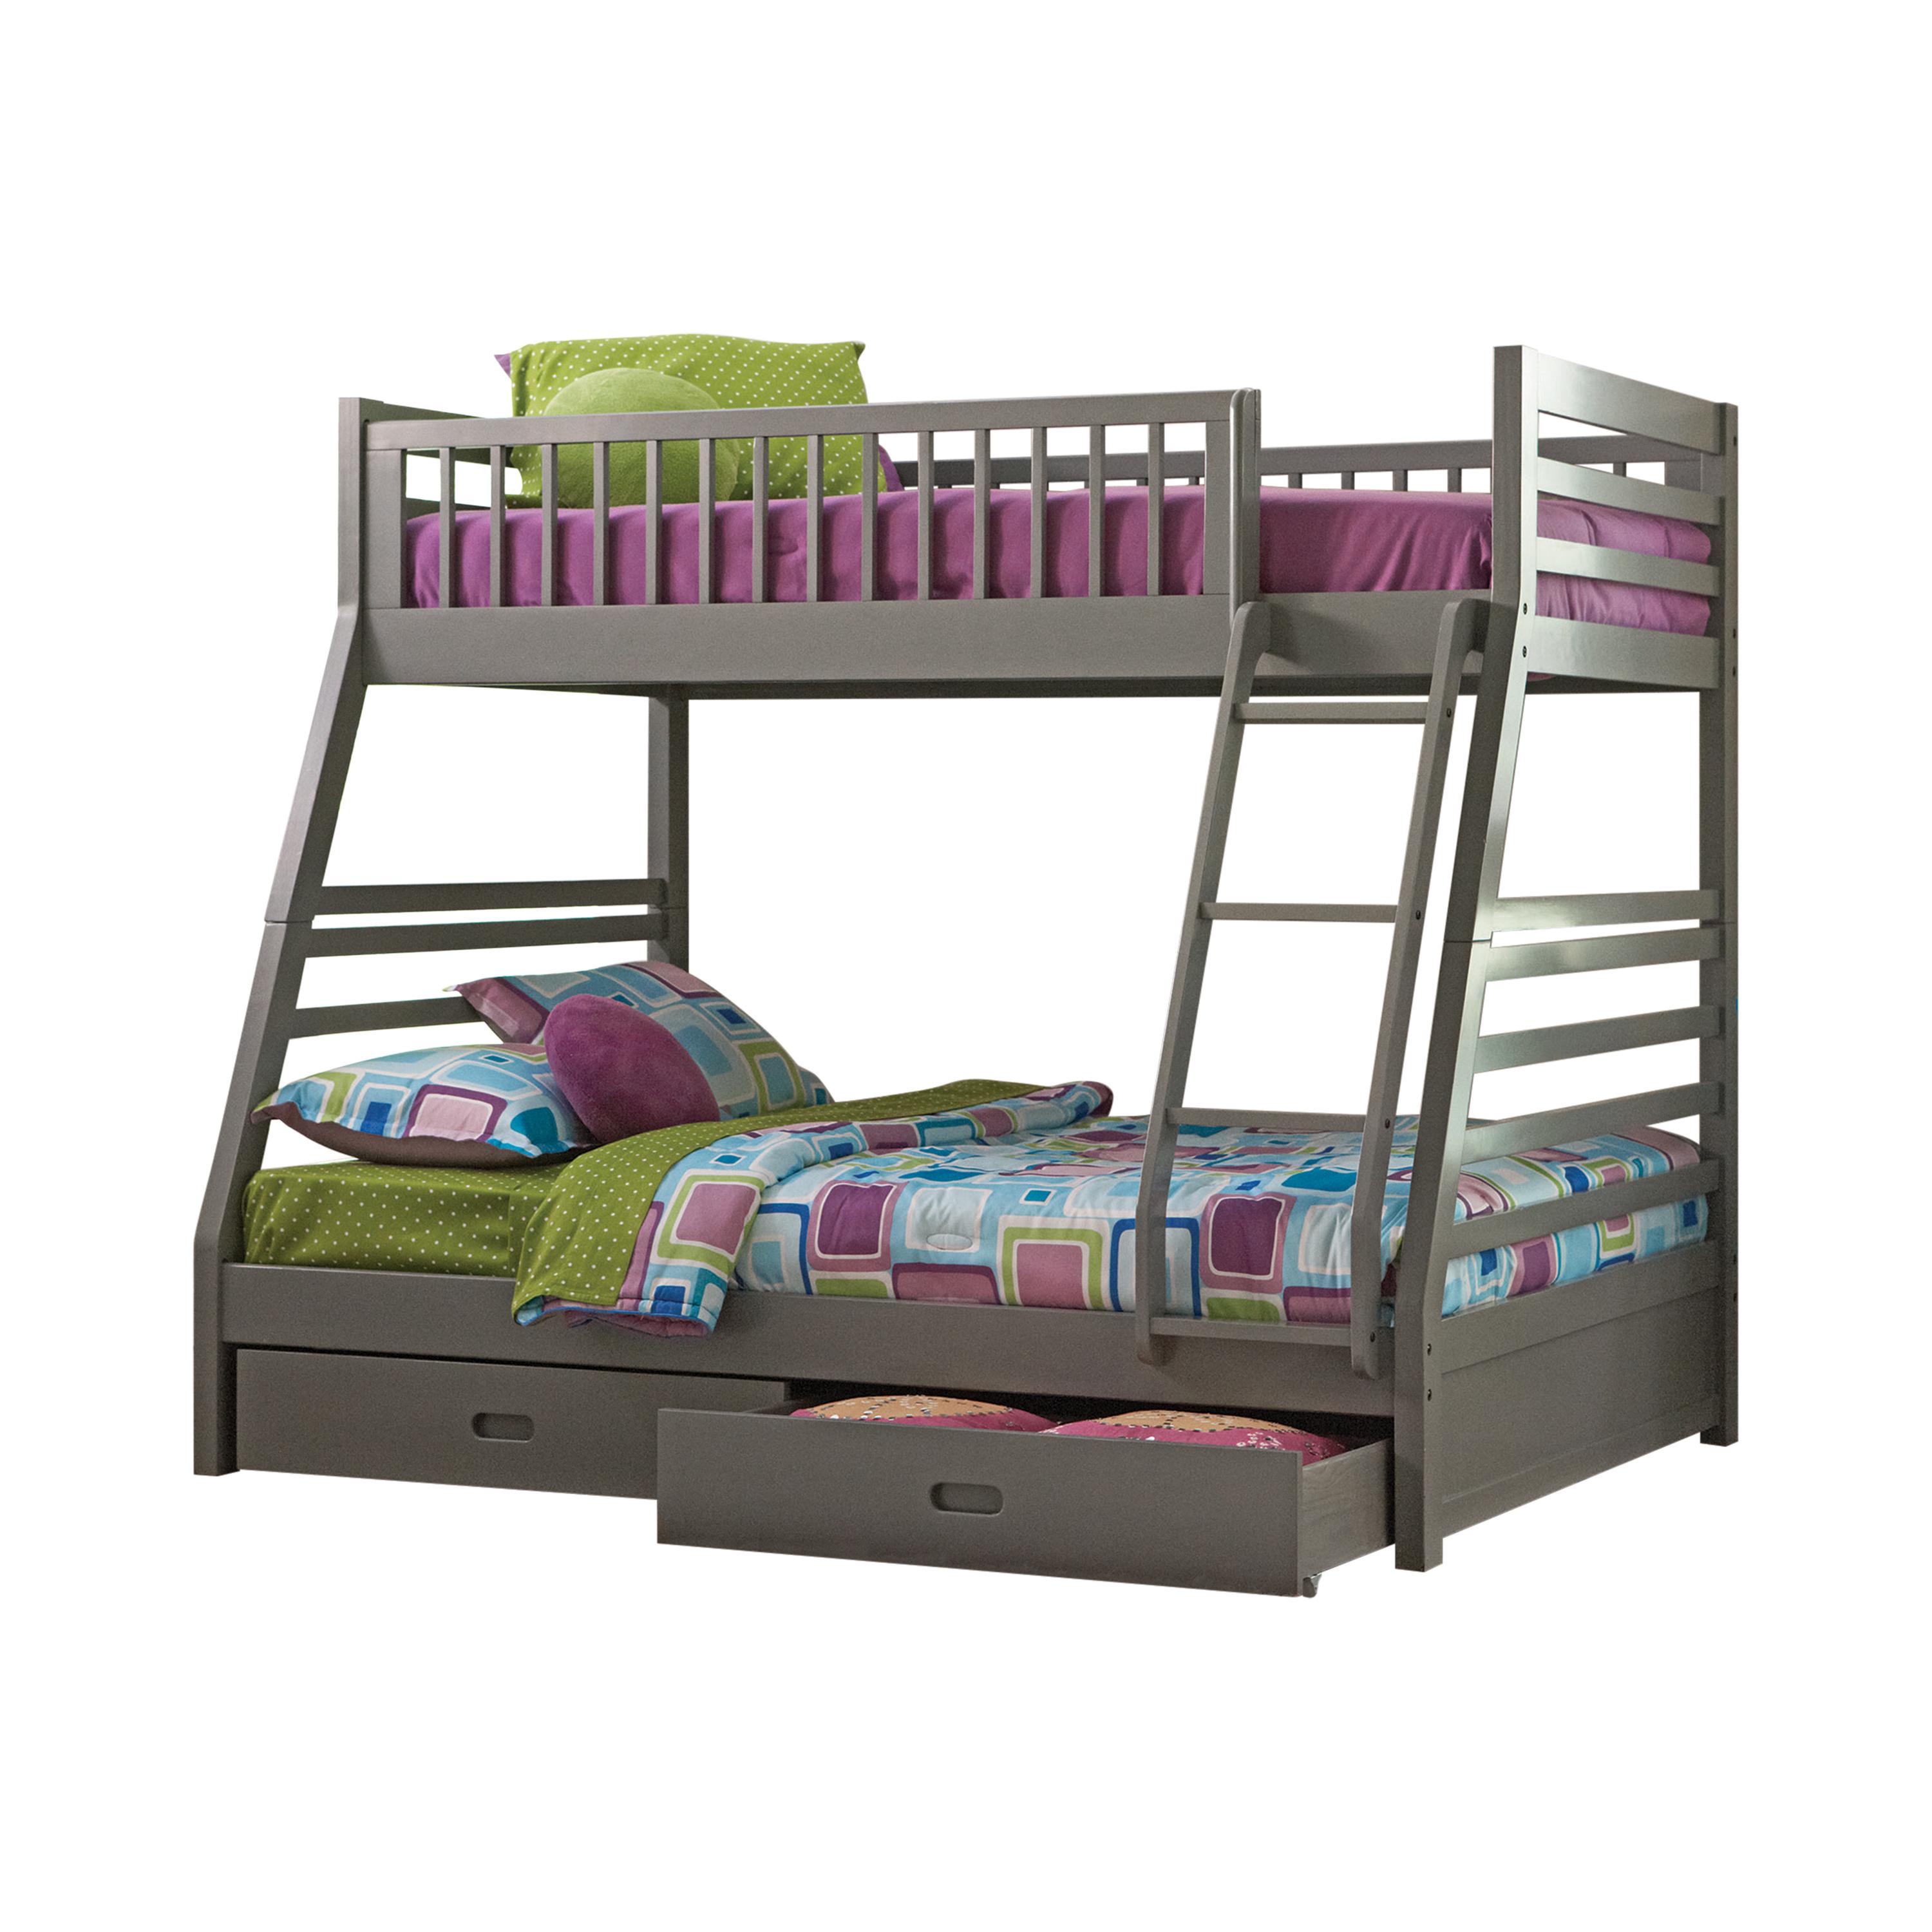 Transitional Bunk Bed 460182 Ashton 460182 in Gray 